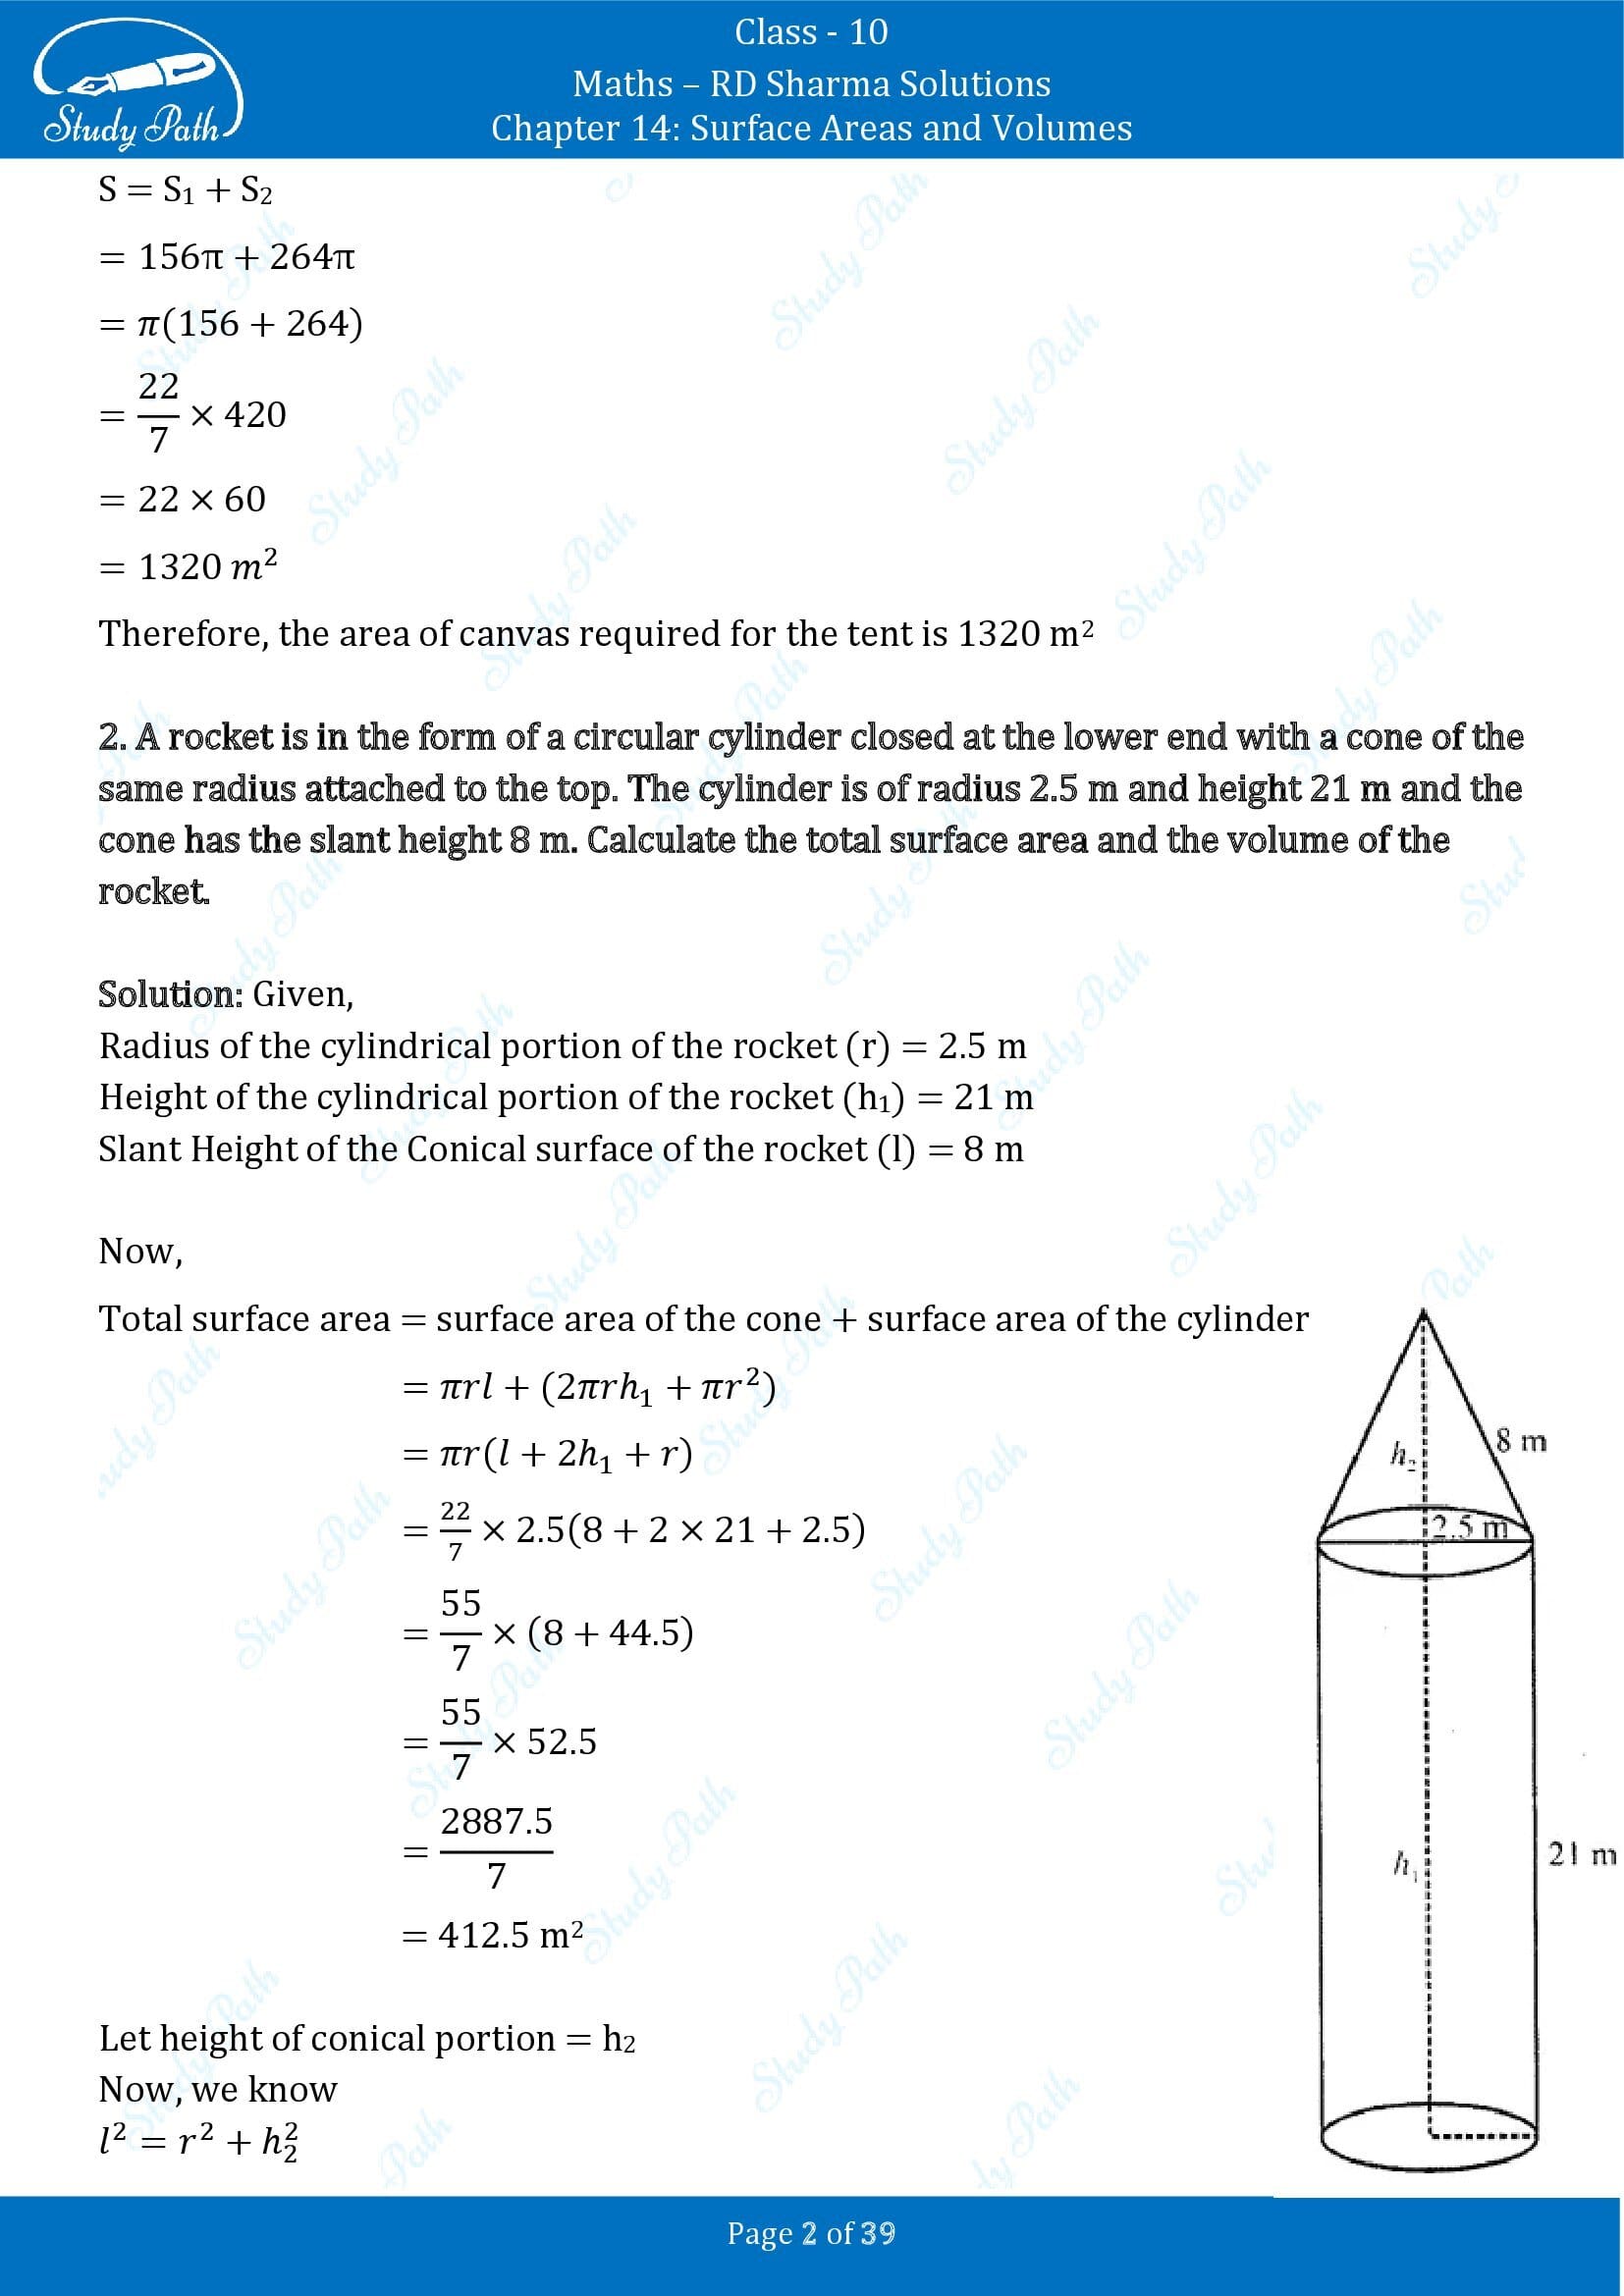 RD Sharma Solutions Class 10 Chapter 14 Surface Areas and Volumes Exercise 14.2 00002